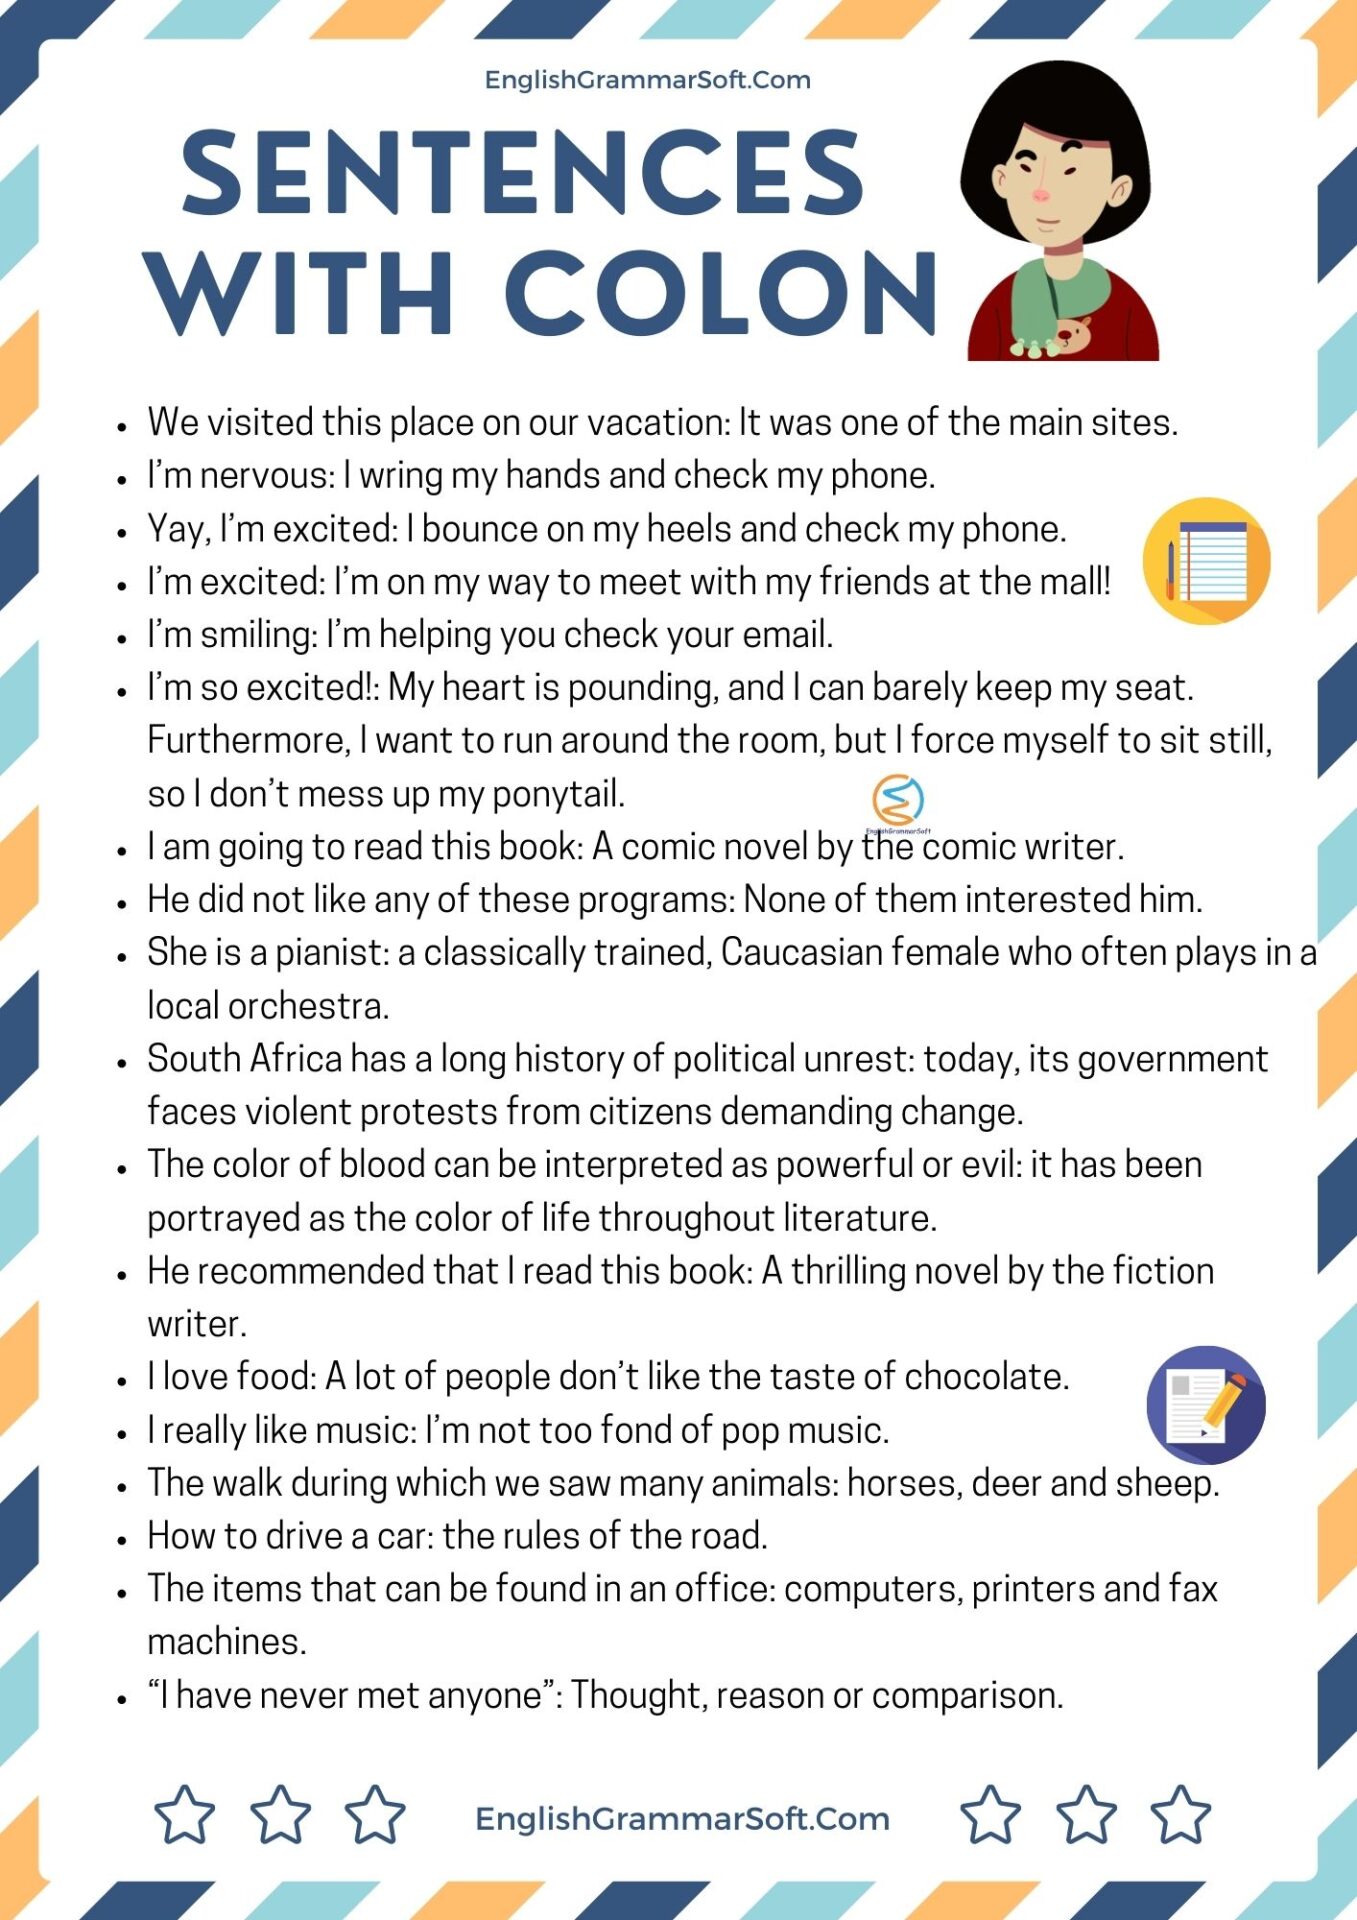 sentences with colon in them